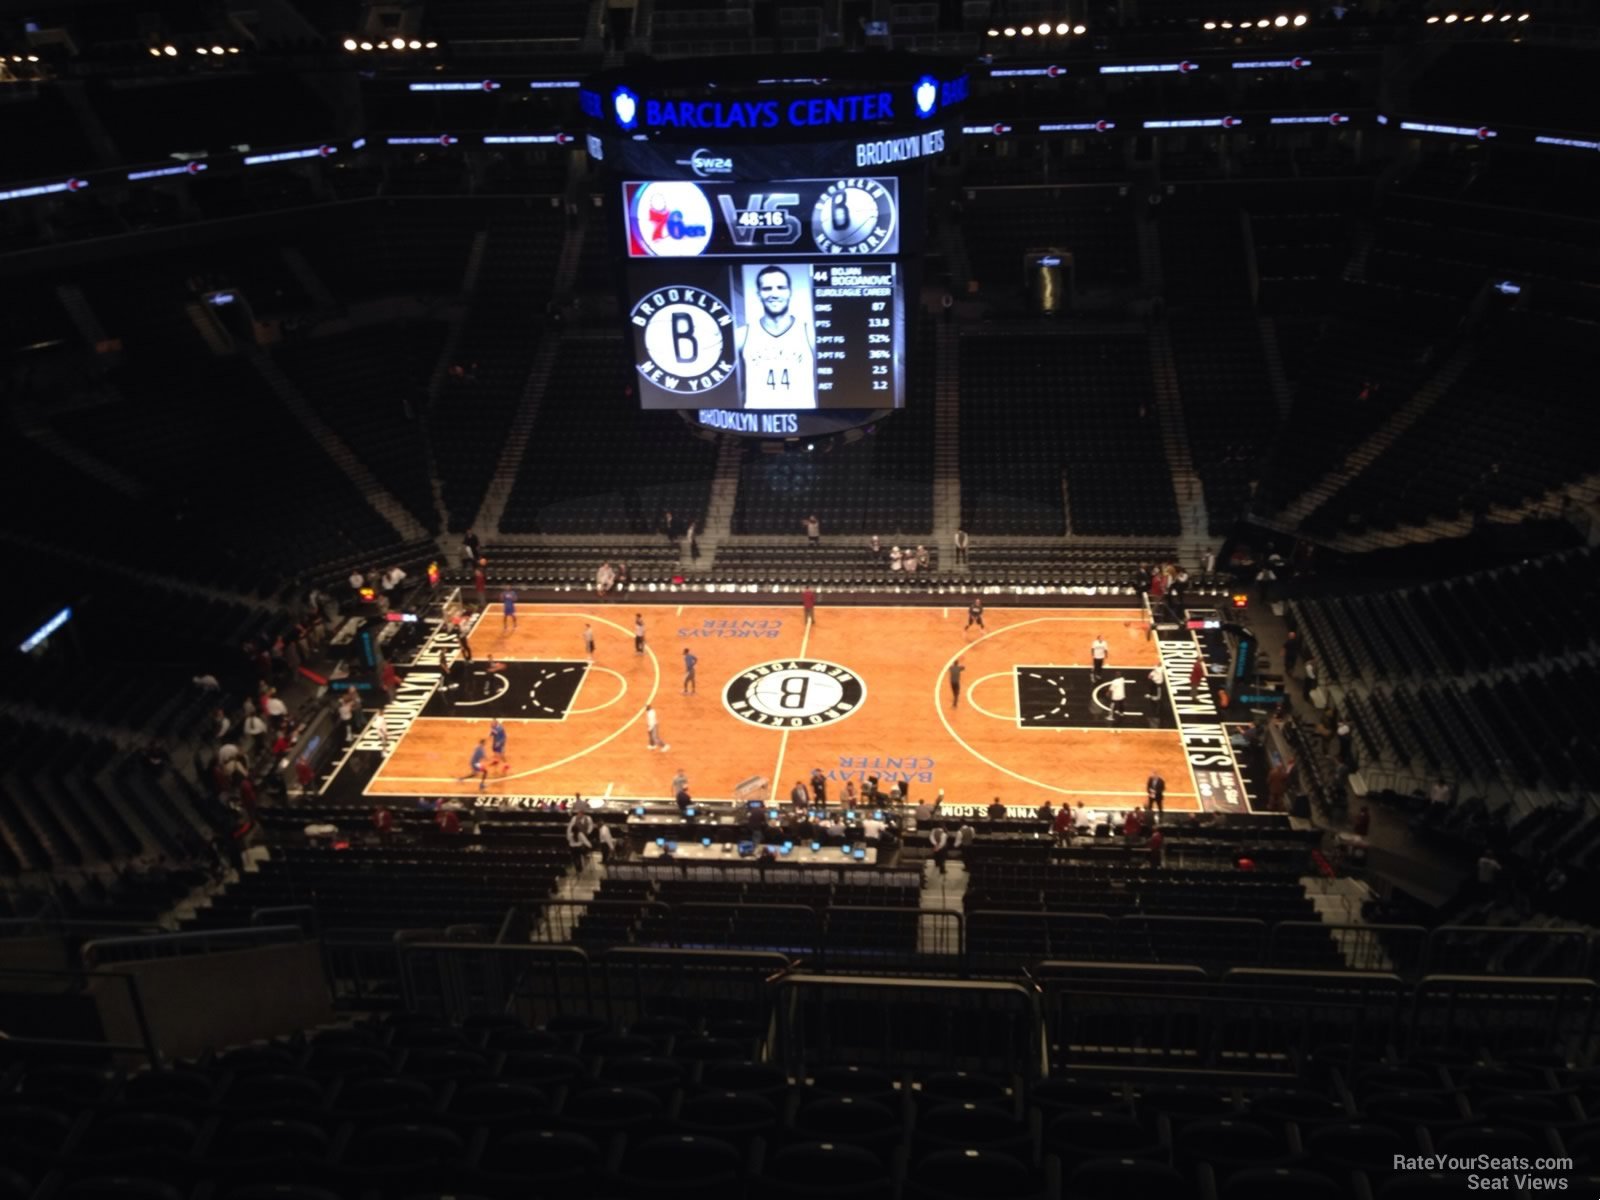 section 207, row 14 seat view  for basketball - barclays center